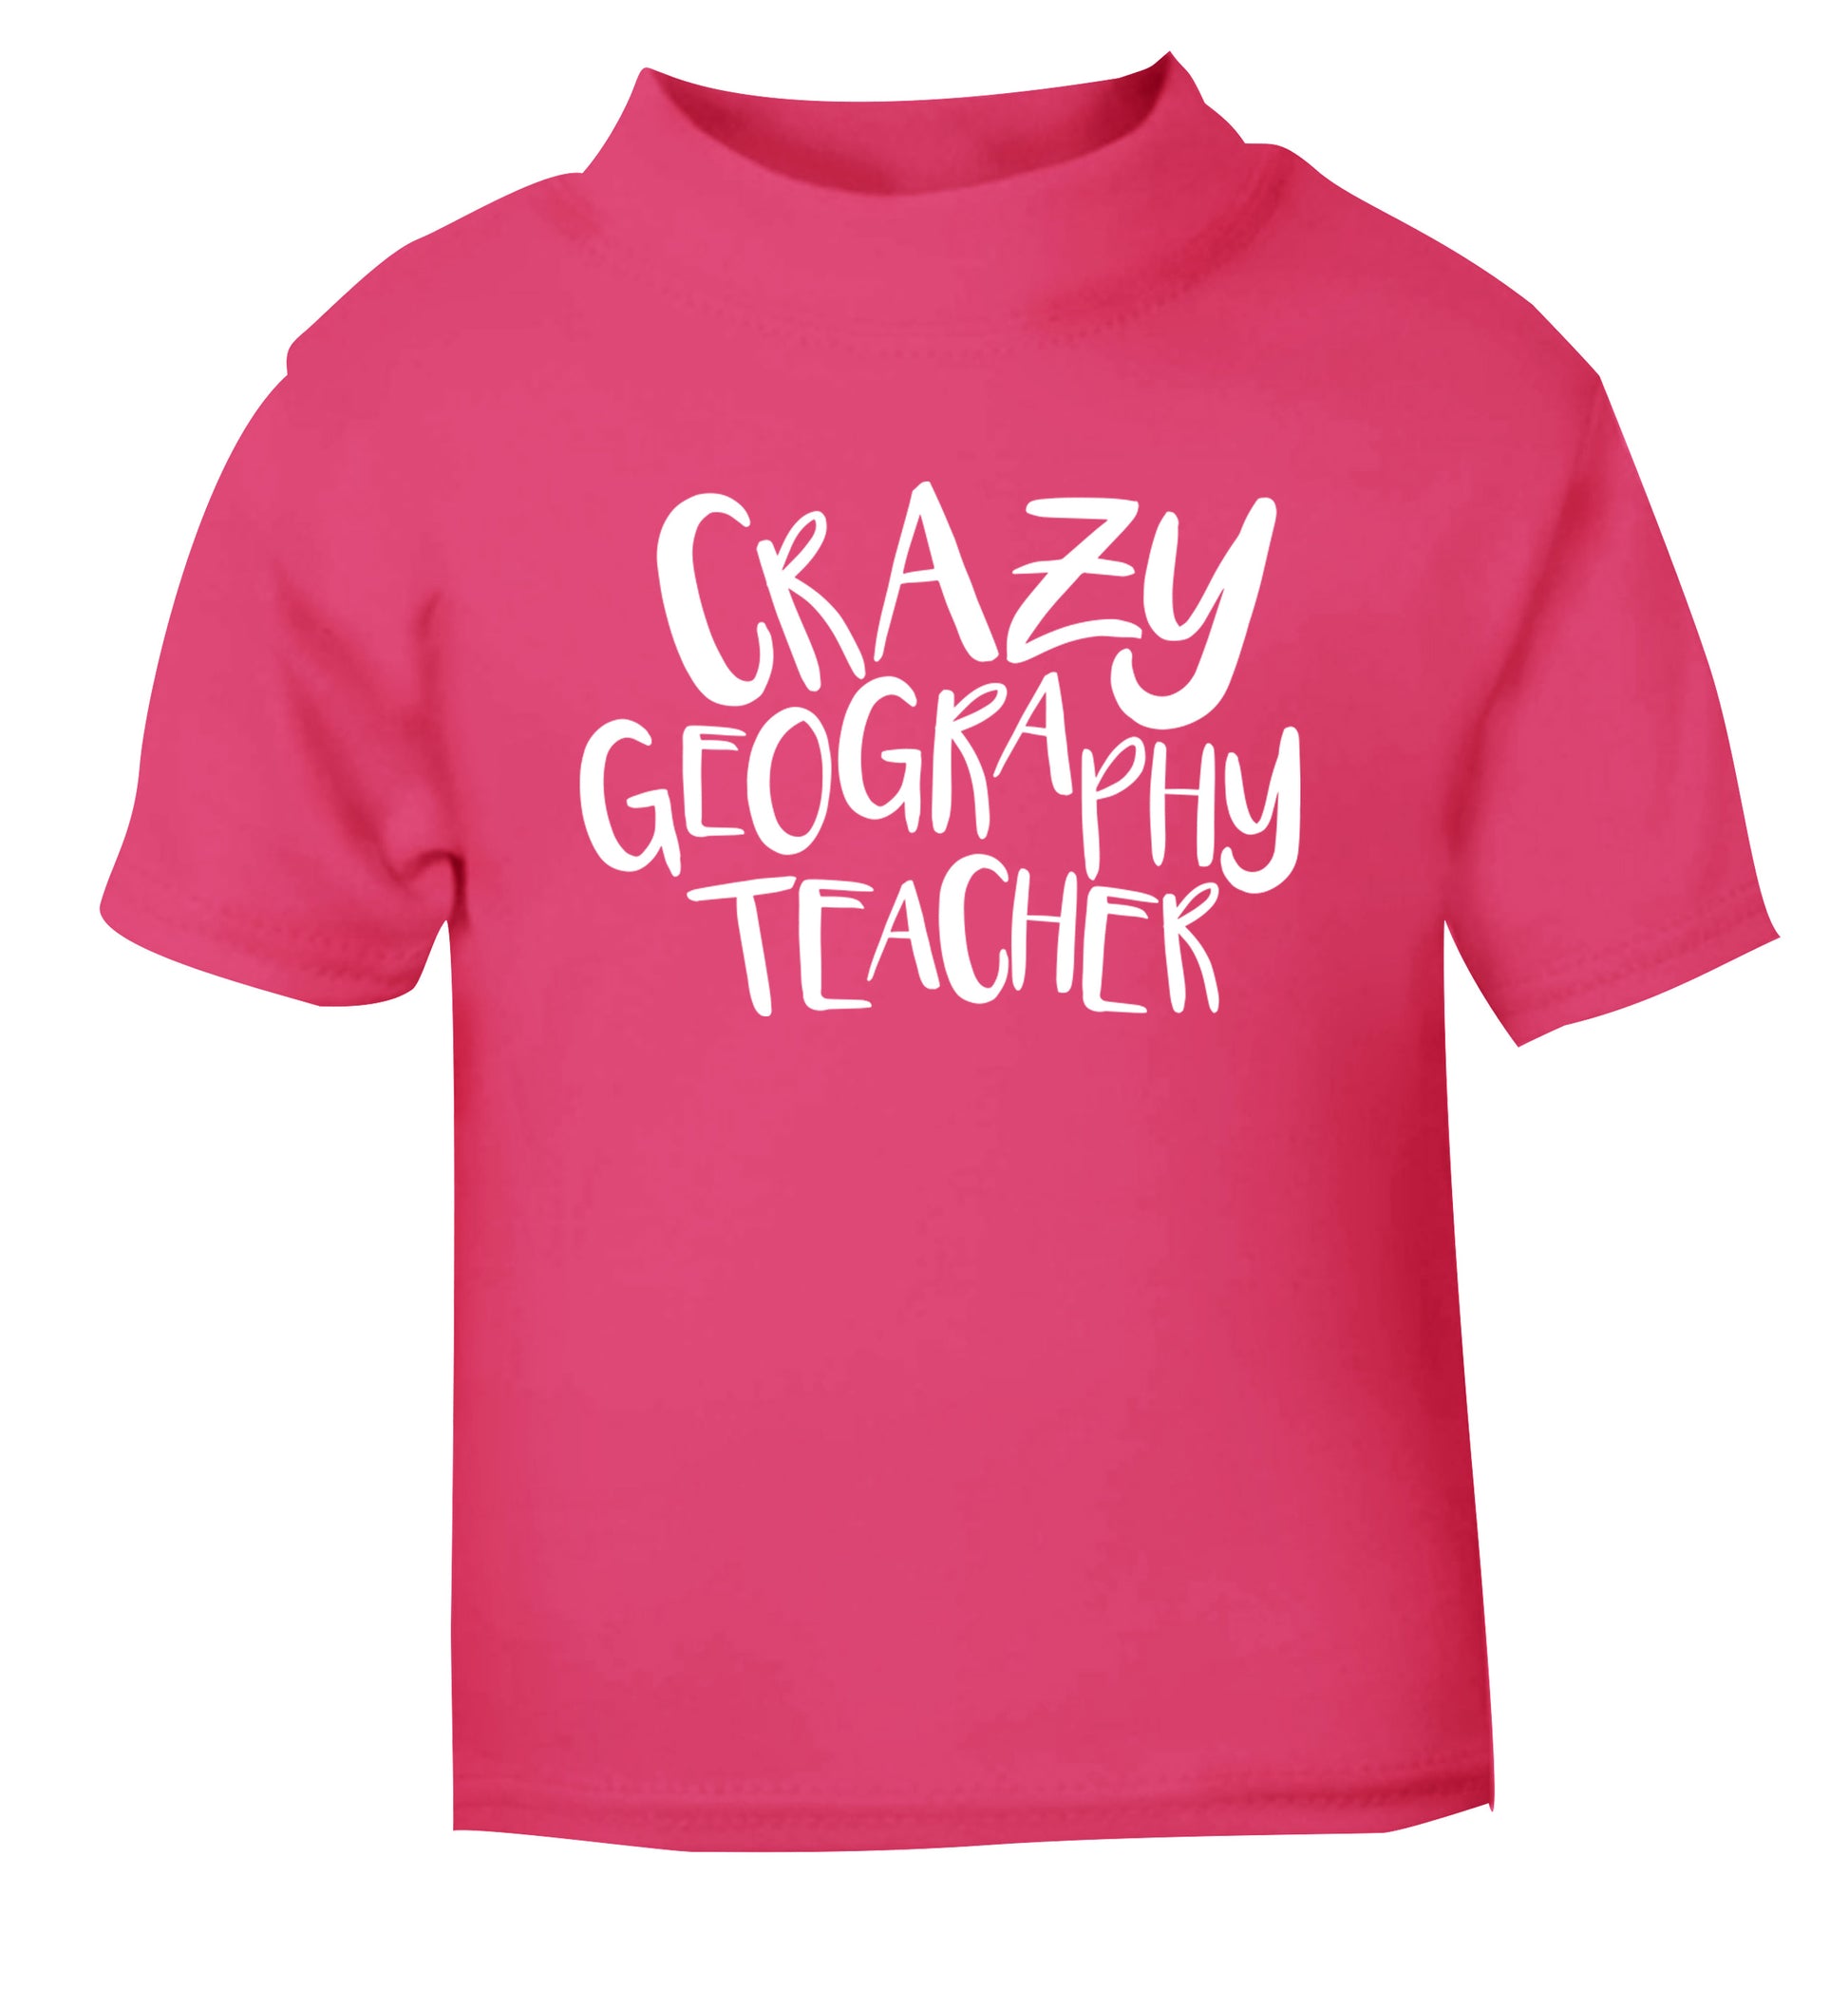 Crazy geography teacher pink Baby Toddler Tshirt 2 Years